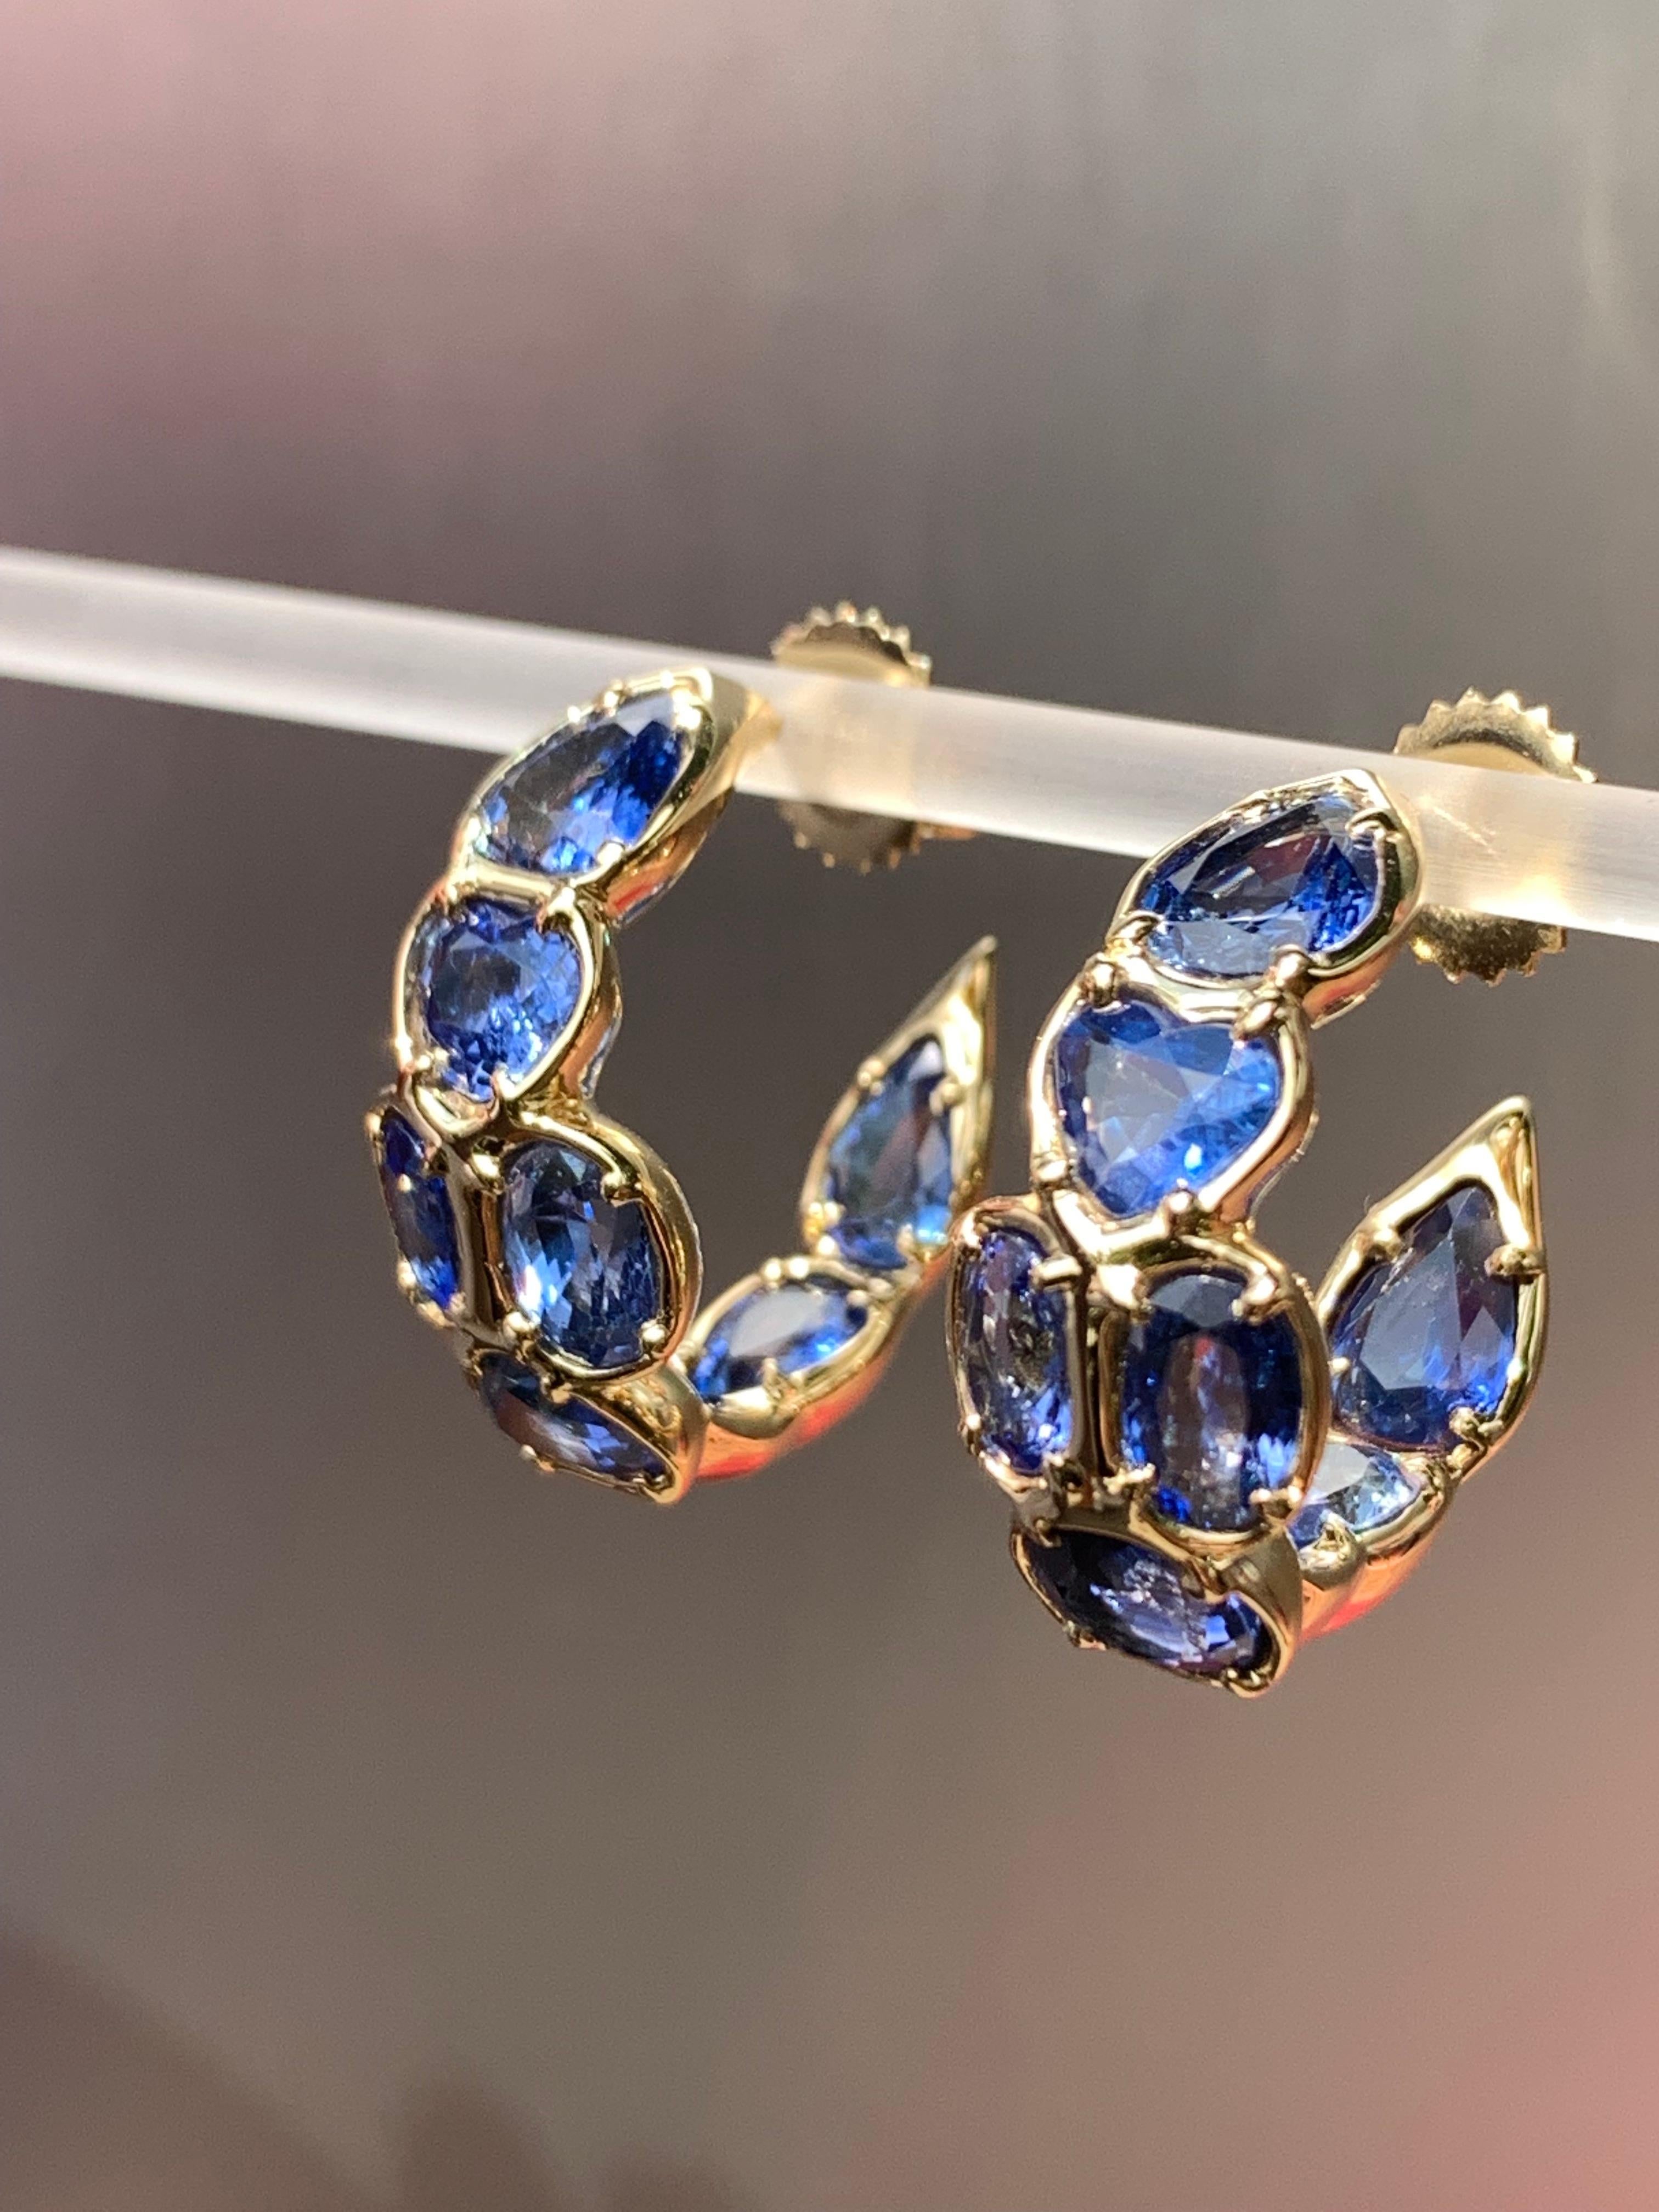 This stunning Blue Sapphire hoop earring is a blue sapphire lovers dream! It's small enough to be low key but the color will radiate however its worn. This is a one-of-a-kind 18kt yellow gold earring made from a selection of fancy cut sapphires